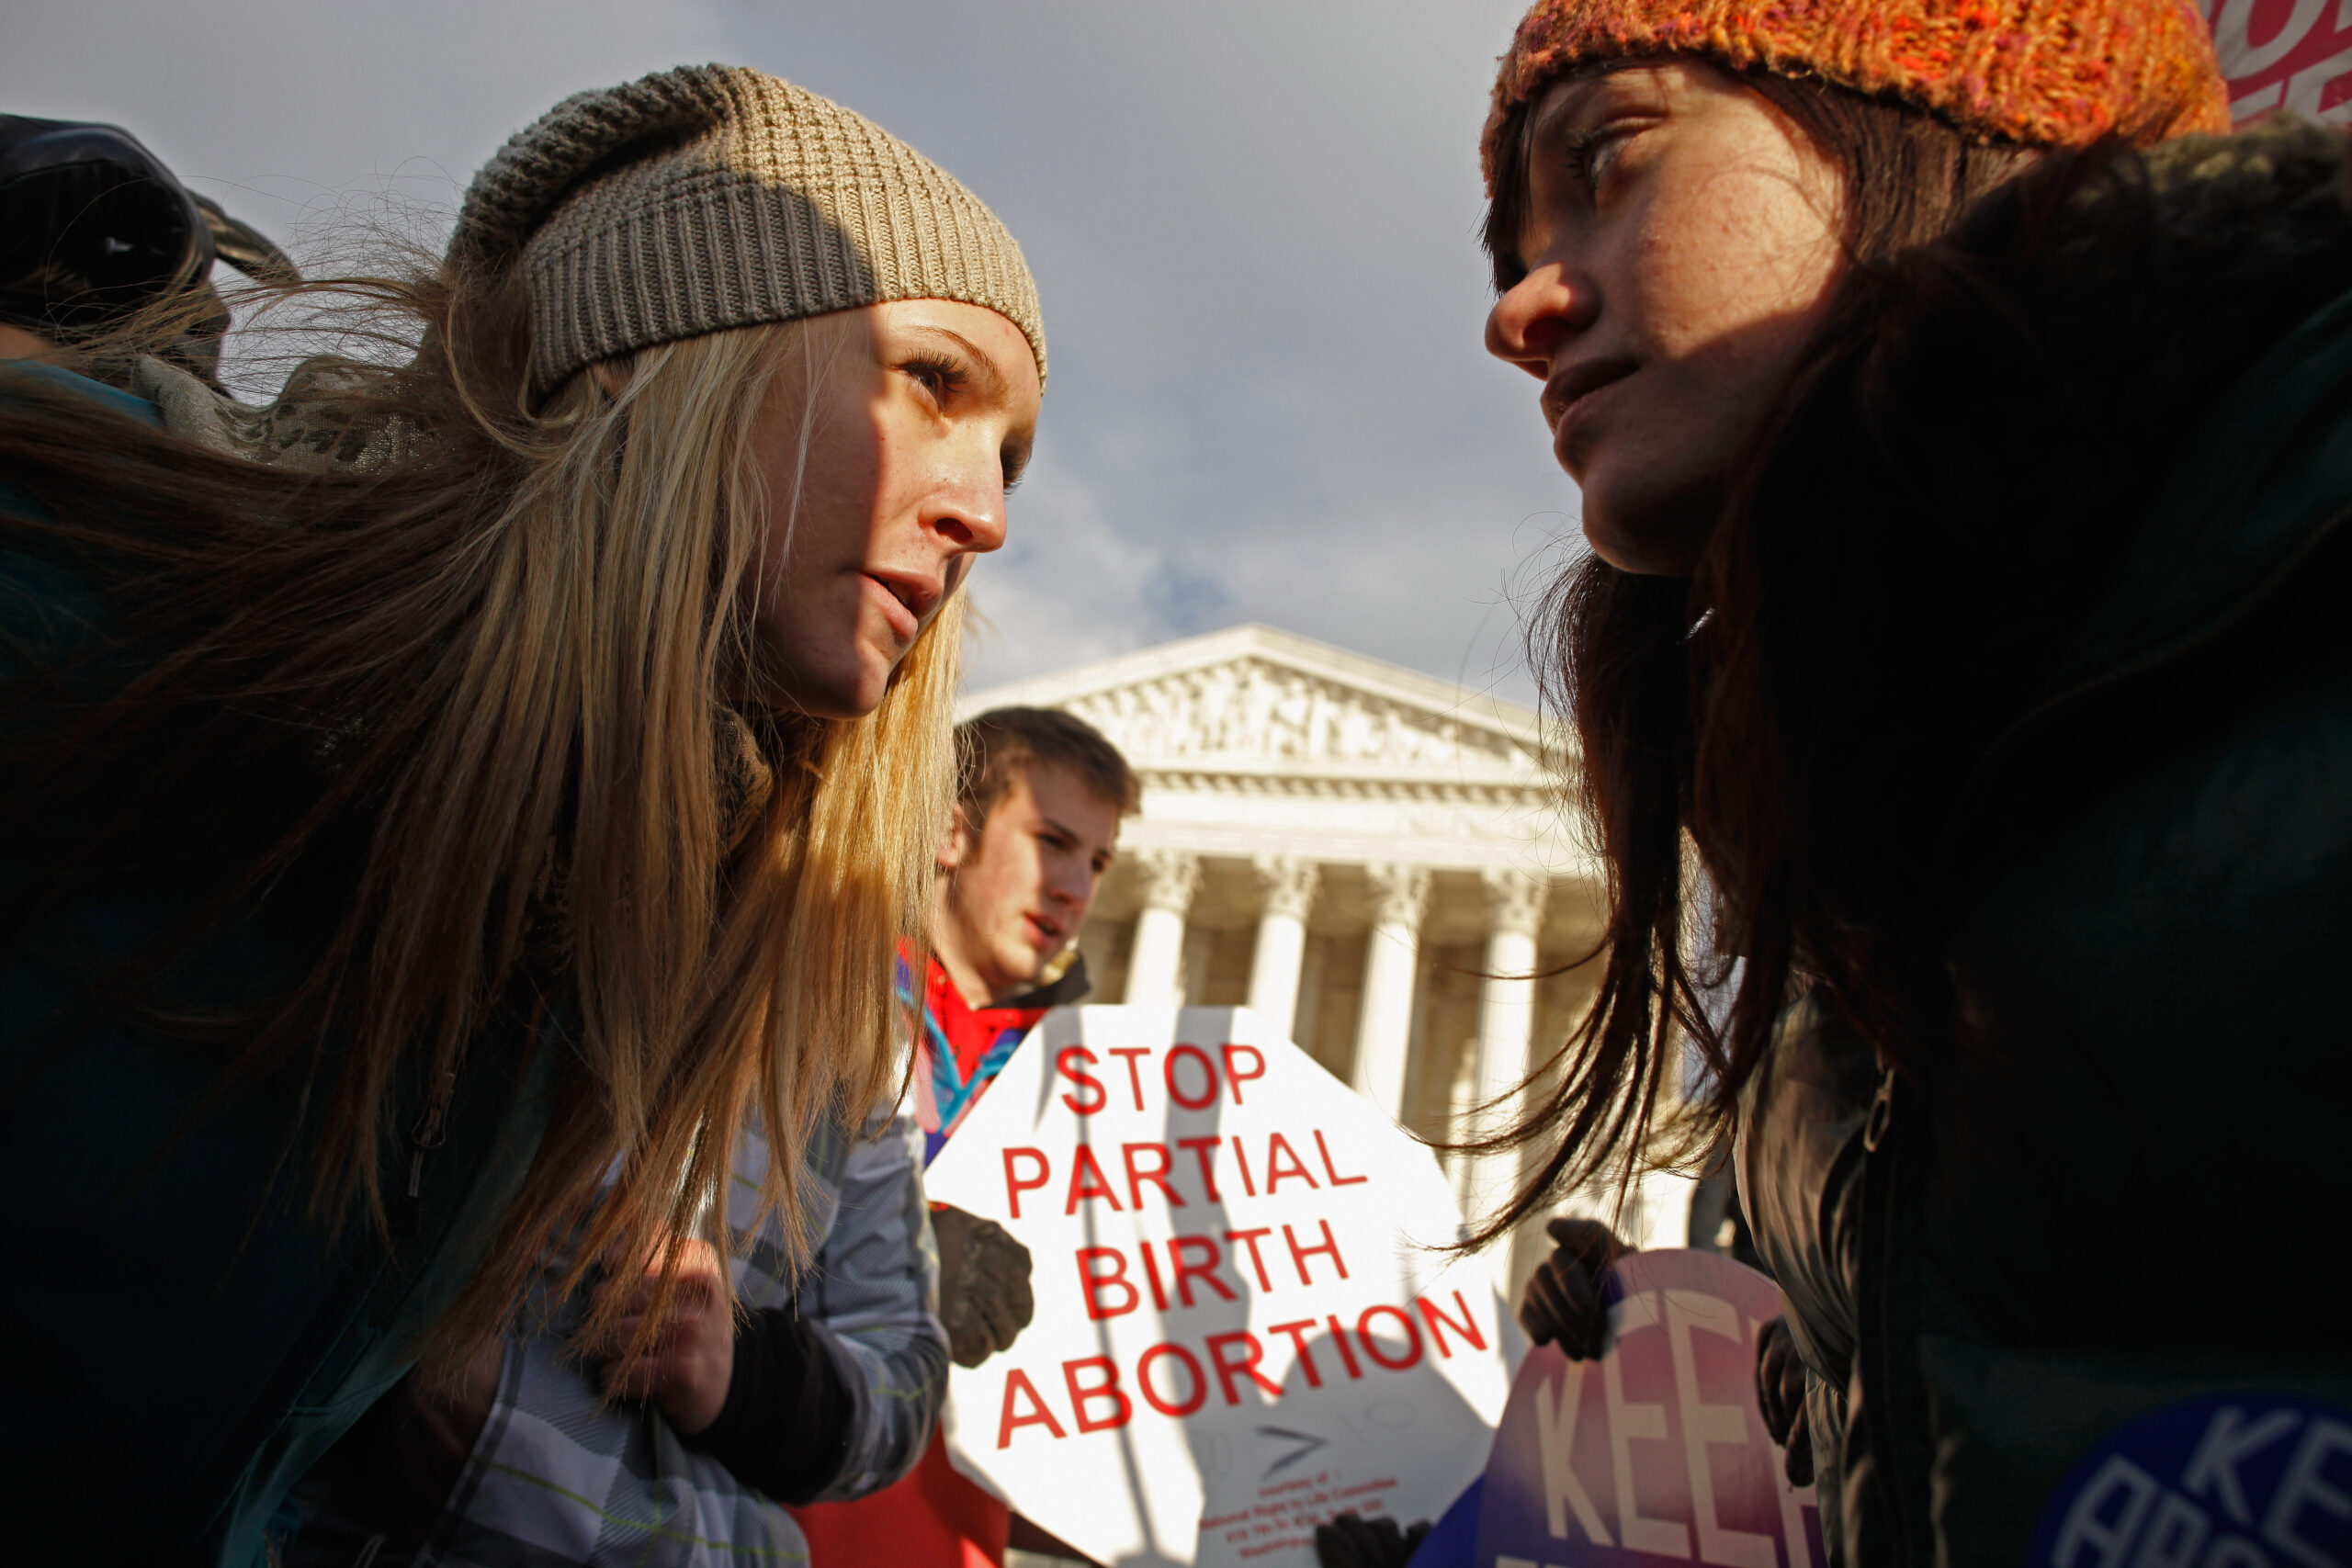 Anti-abortion and pro-choice demonstrators argue in front of the Supreme Court during the March for Life January 24, 2011 in Washington, DC (Chip Somodevilla/Getty Images)